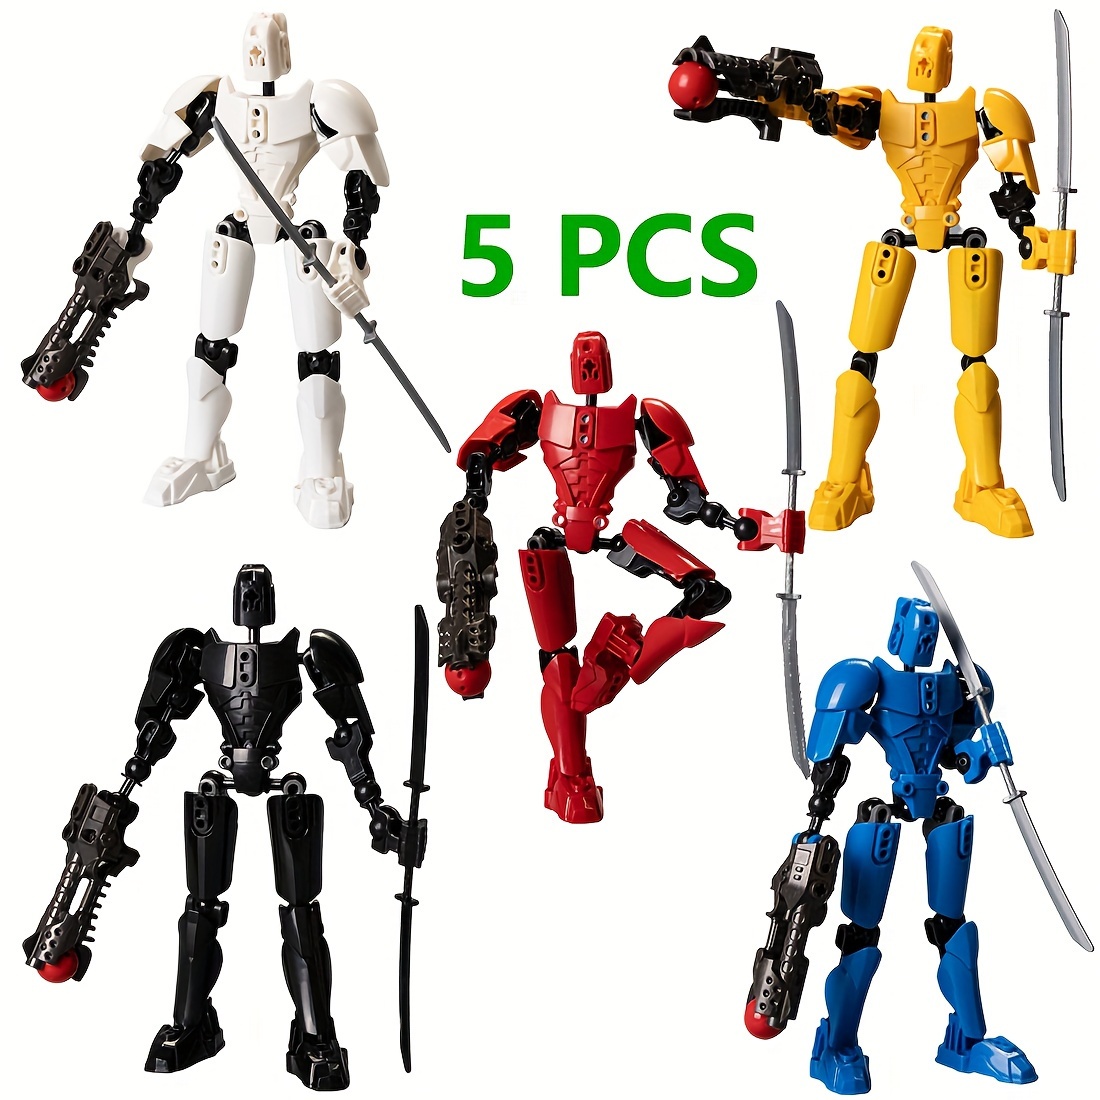 

T13 Action Figure Titan 13 Figures, Dummy 13 Multi Jointed Full Body Mechanical Movable Desktop Decorations For Game Lovers